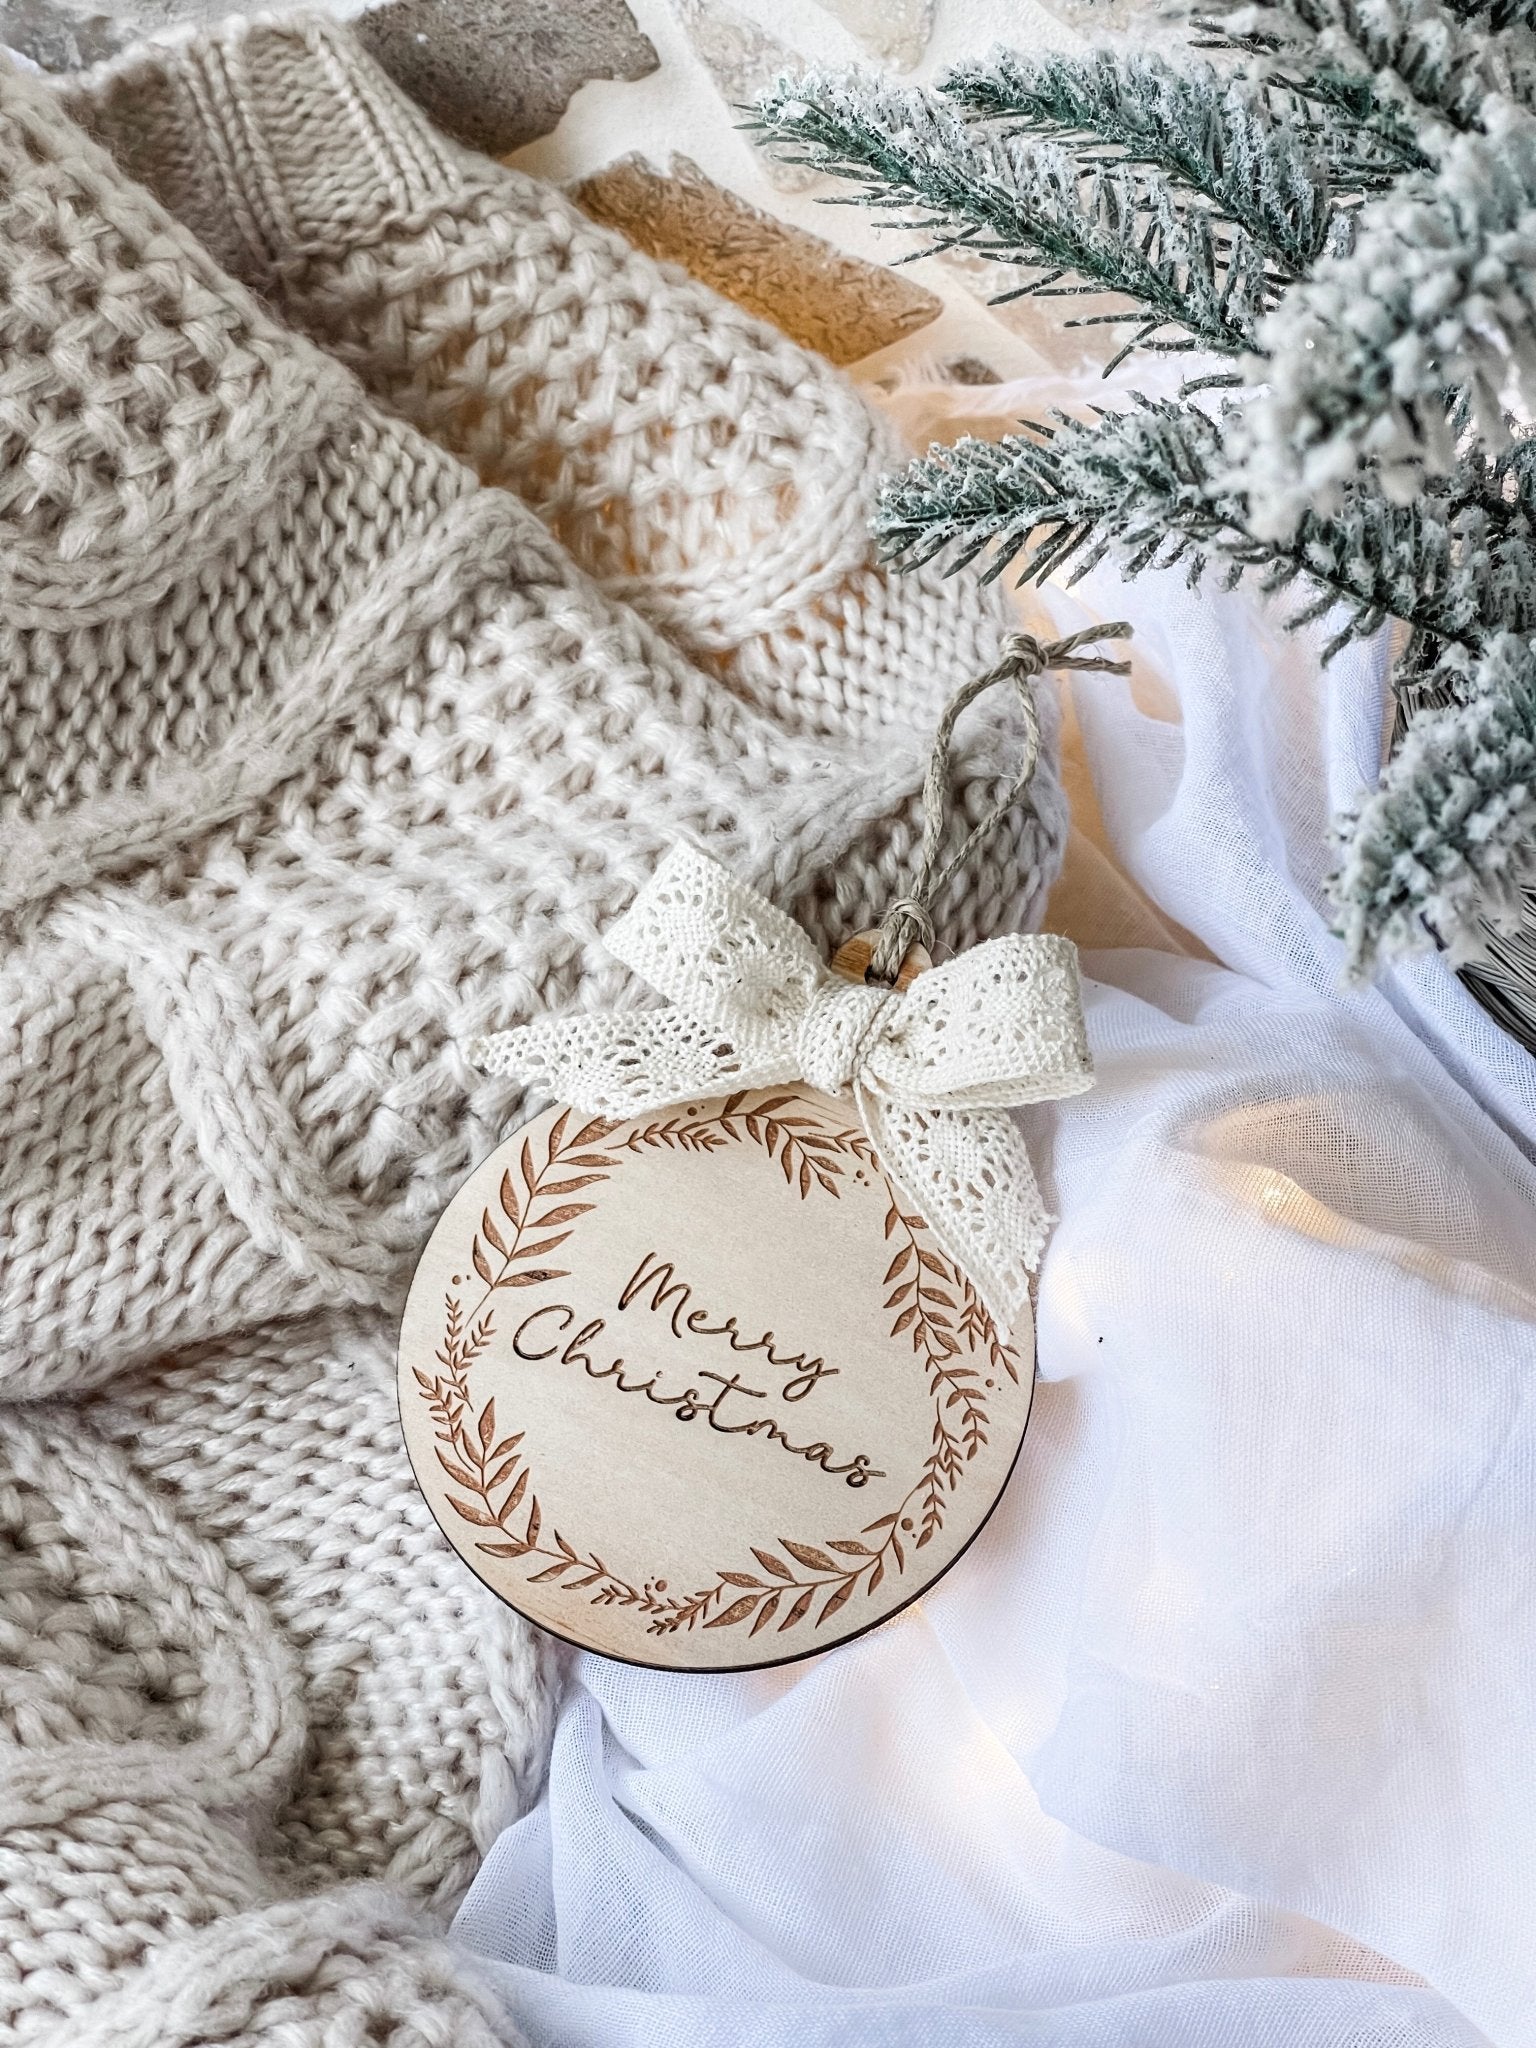 Merry Christmas Wooden Ornament - The Humble Gift Co.